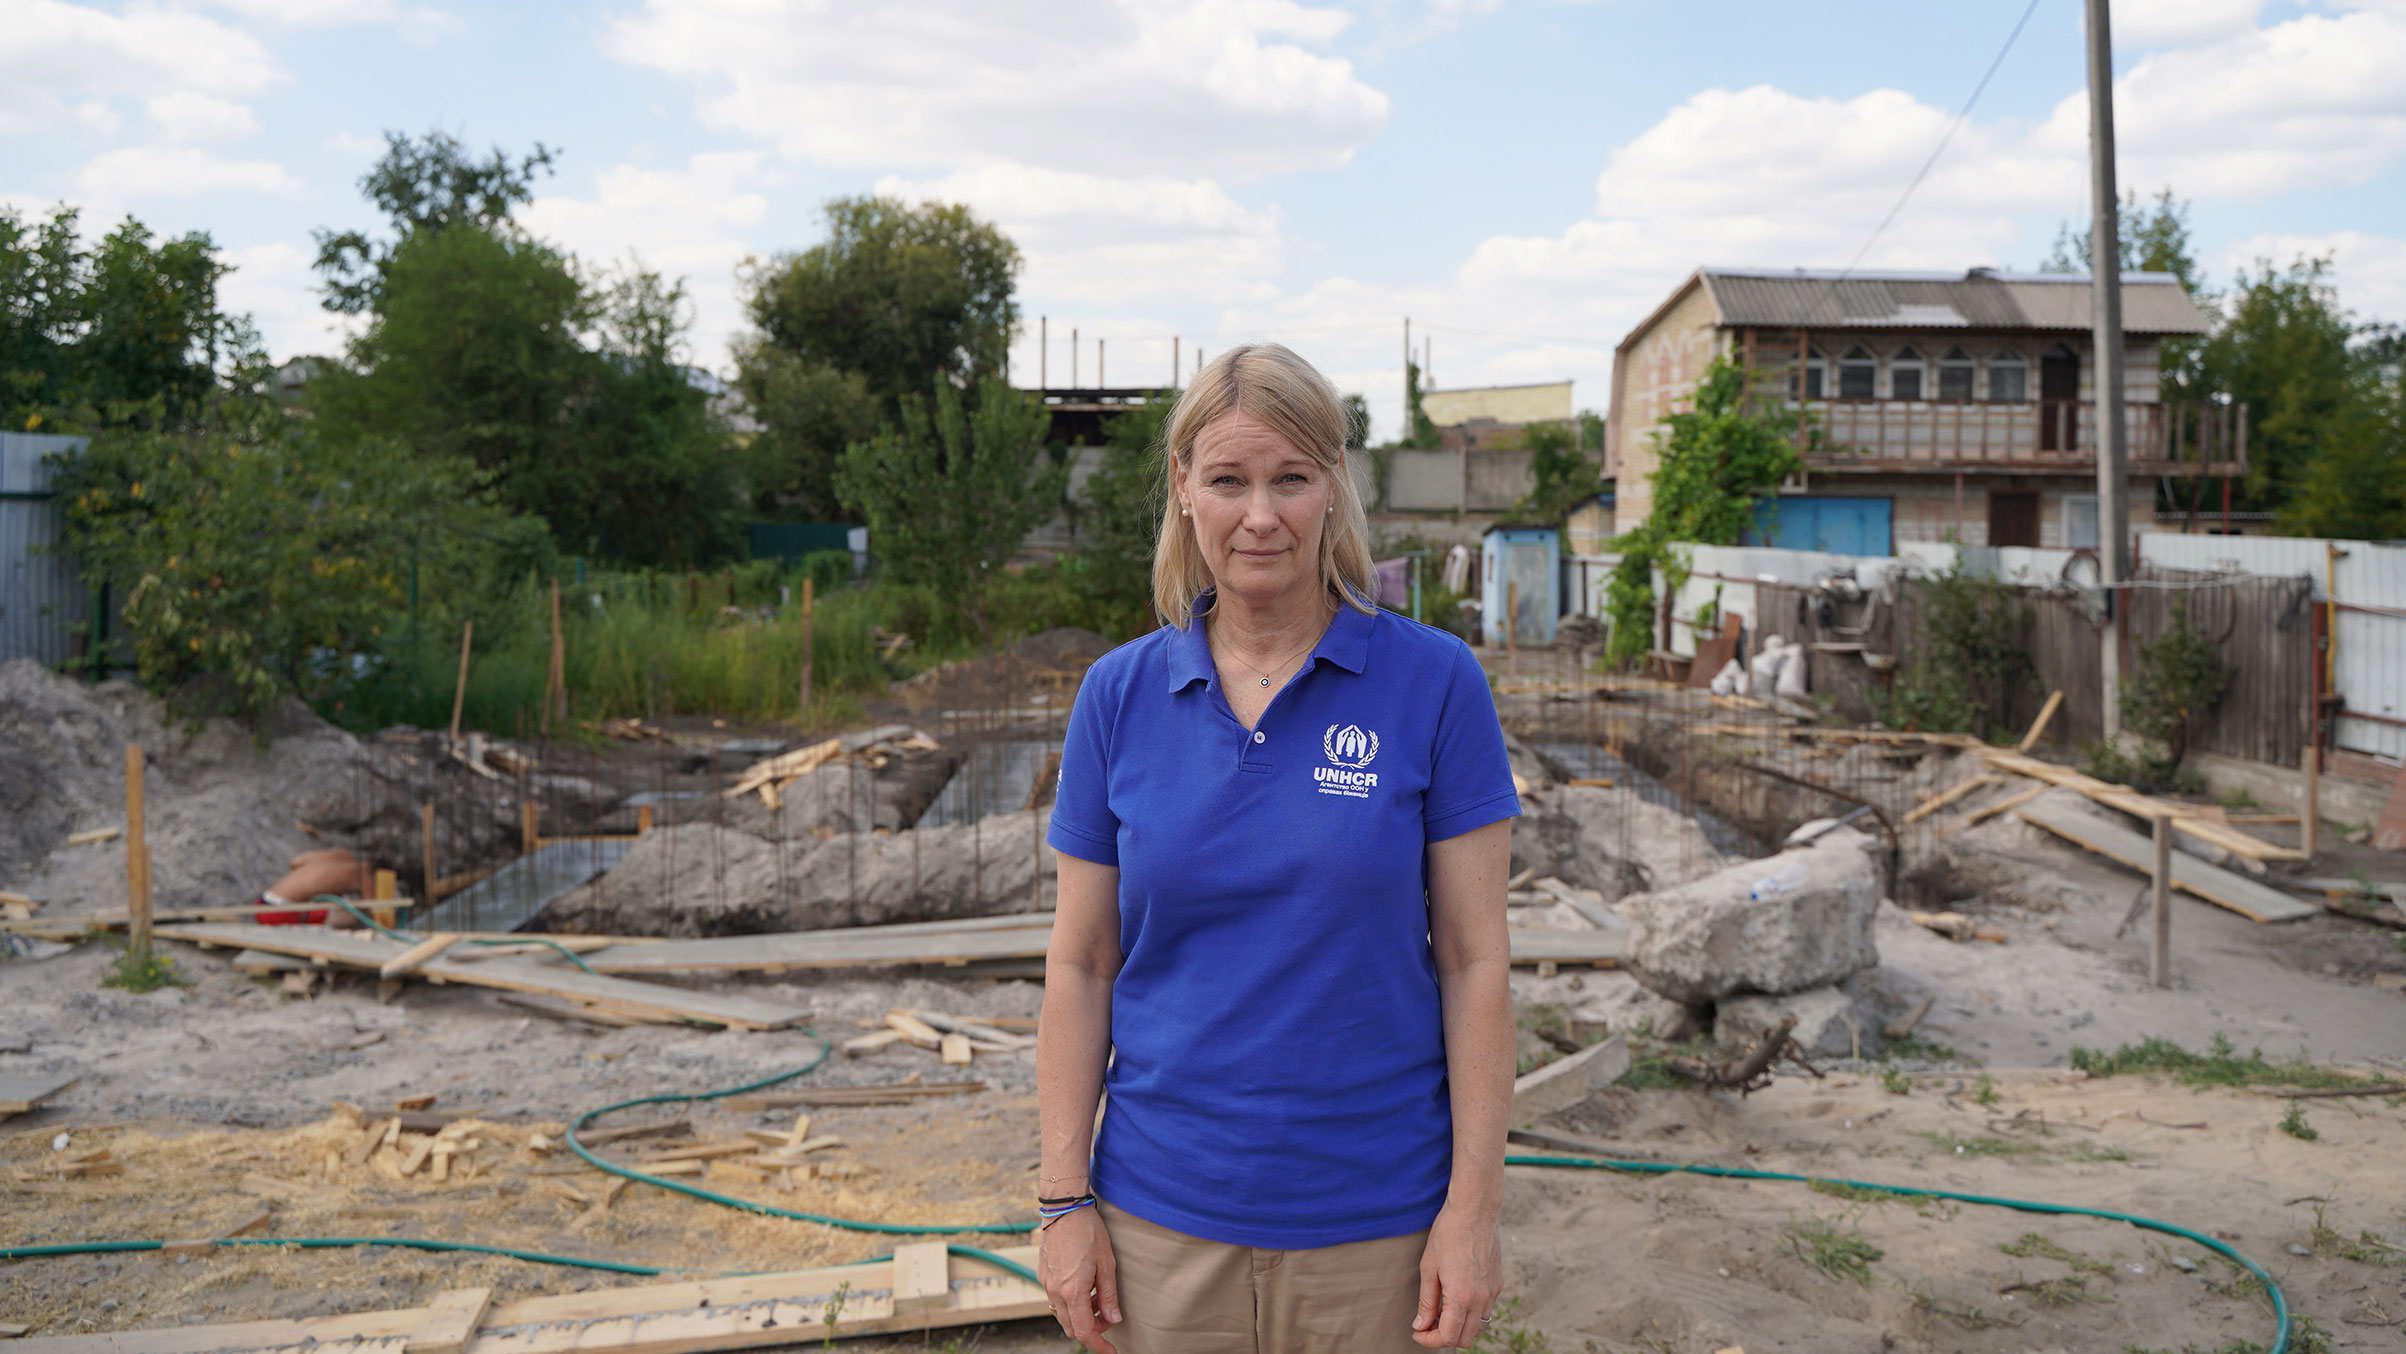 Karolina is pictured standing next to a construction area